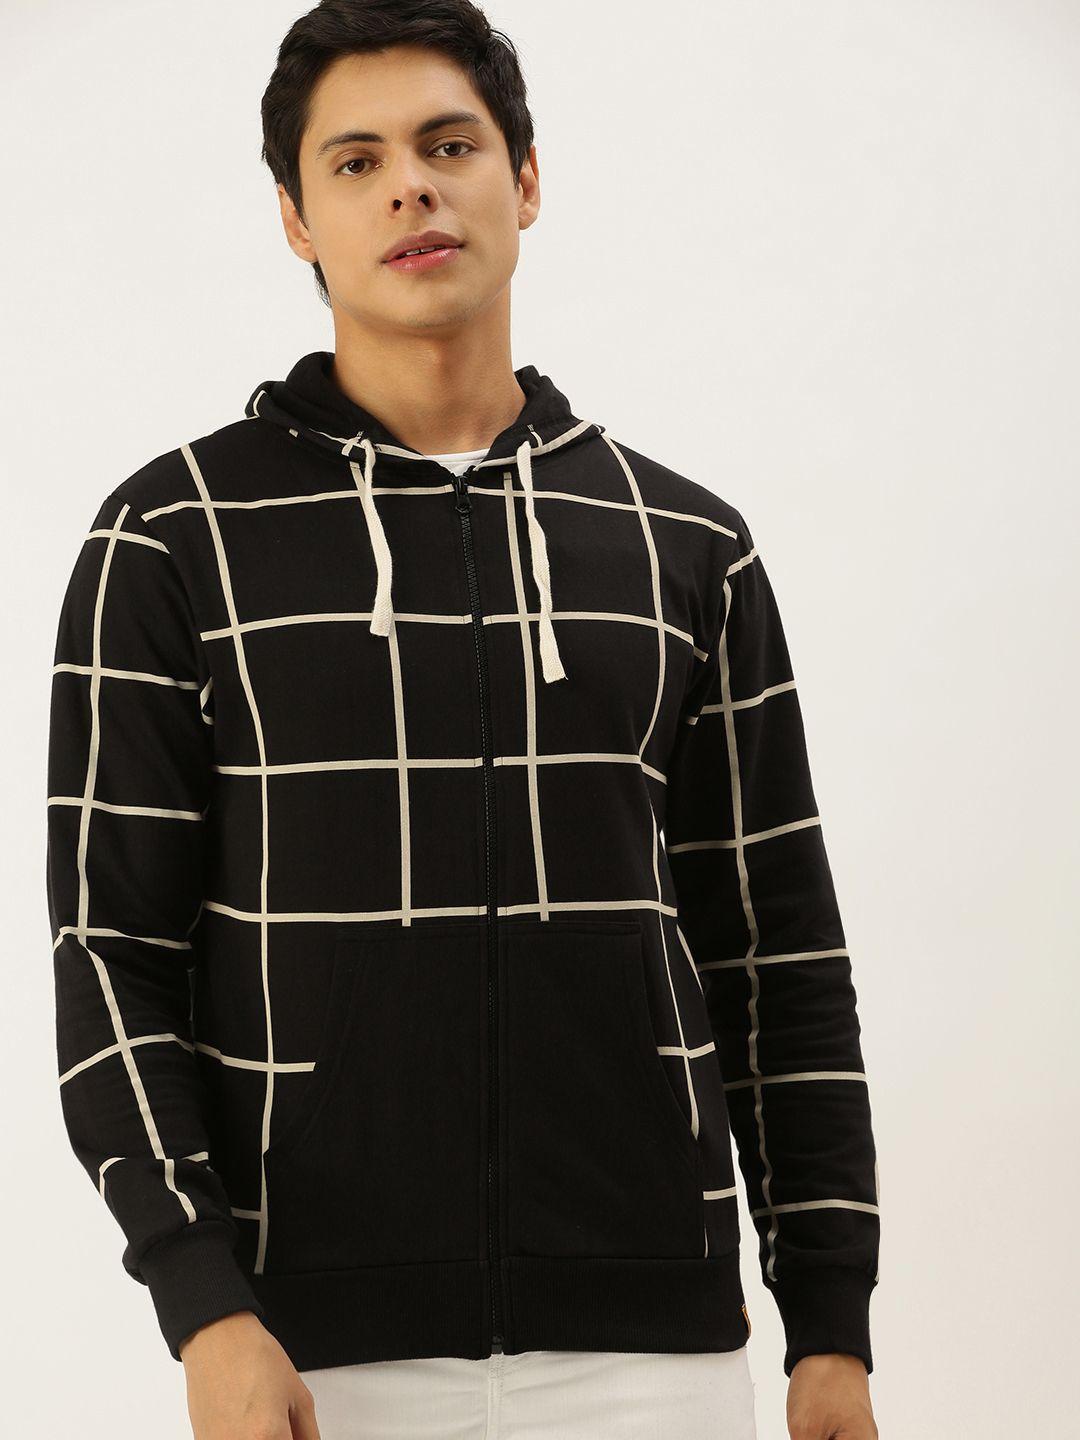 campus sutra men black & off white checked hooded sweatshirt